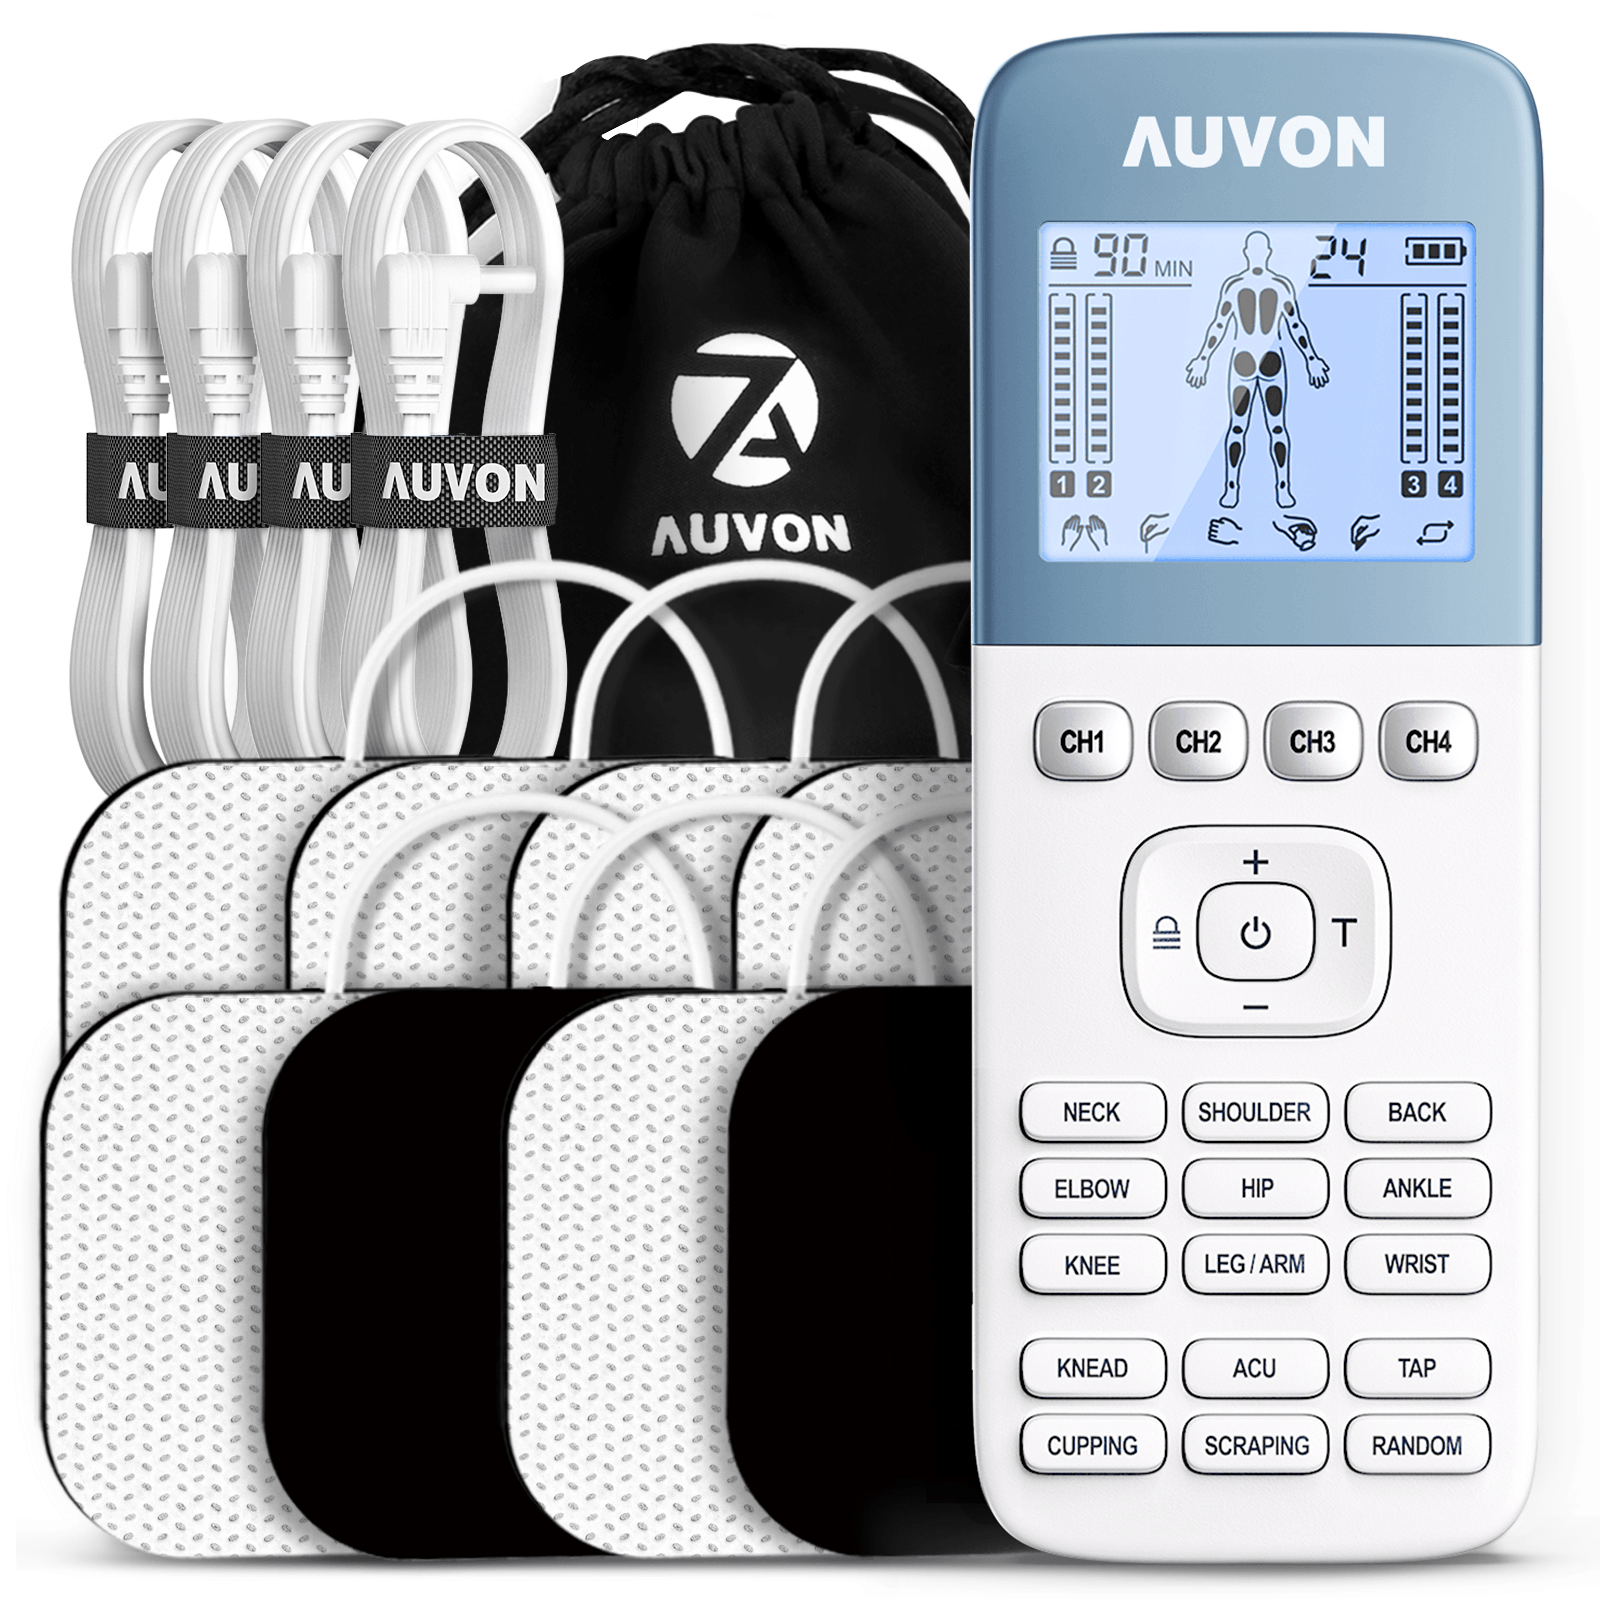 https://auvonhealth.com/cdn/shop/files/auvon-4-outputs-h1-tens-unit-24-modes-muscle-stimulator-for-pain-relief-rechargeable-tens-ems-machine-with-easy-to-select-button-design-2x-battery-life-dust-proof-bag-and-8-electrode_c879c02a-6355-4918-9250-a4b7d3cdc37a.png?v=1686019696